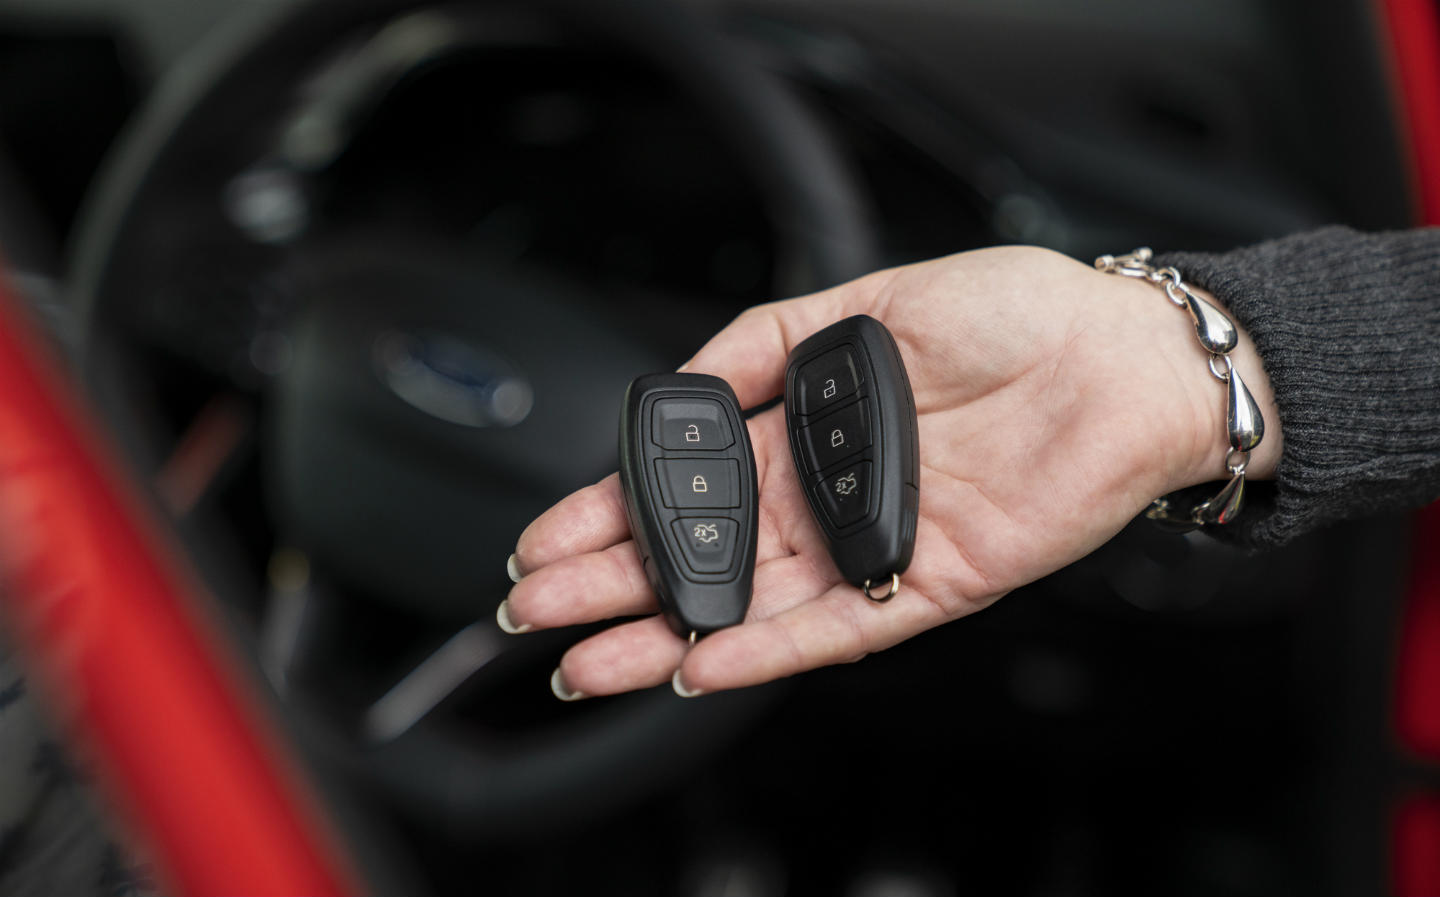 Ford introduces key fob with "sleep mode" that prevents keyless car thefts